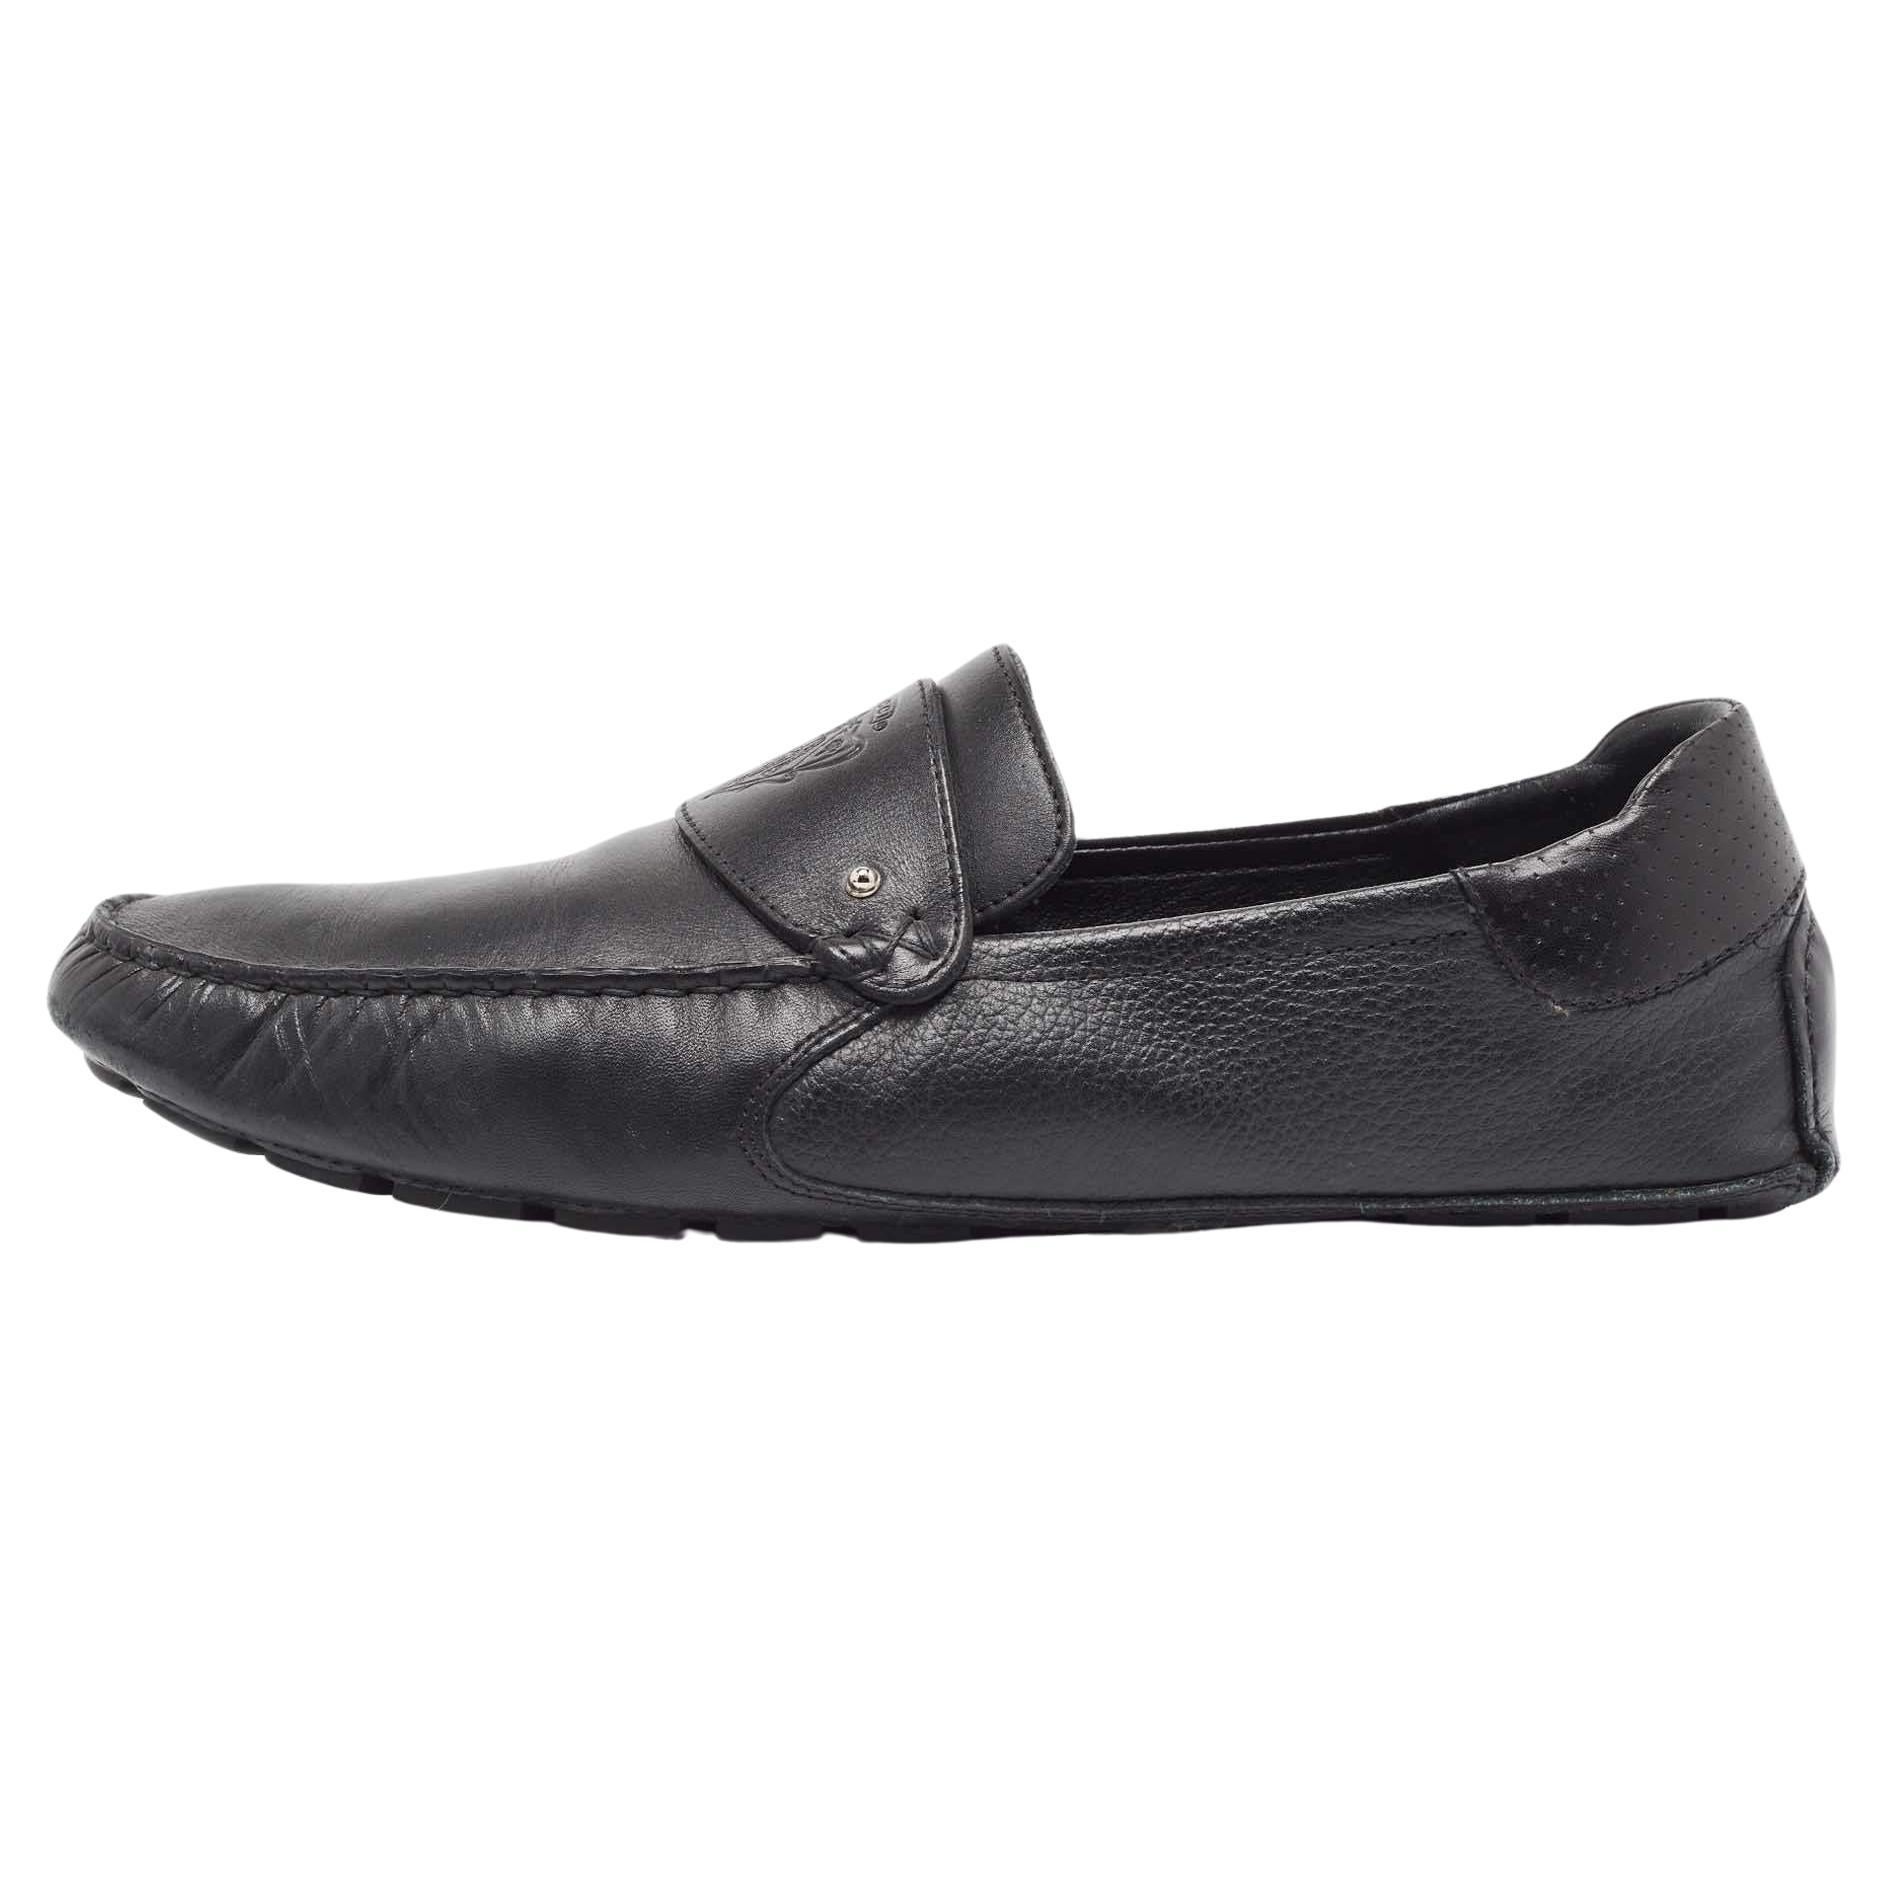 Gucci Black Leather Slip On Loafers Size 44.5 For Sale